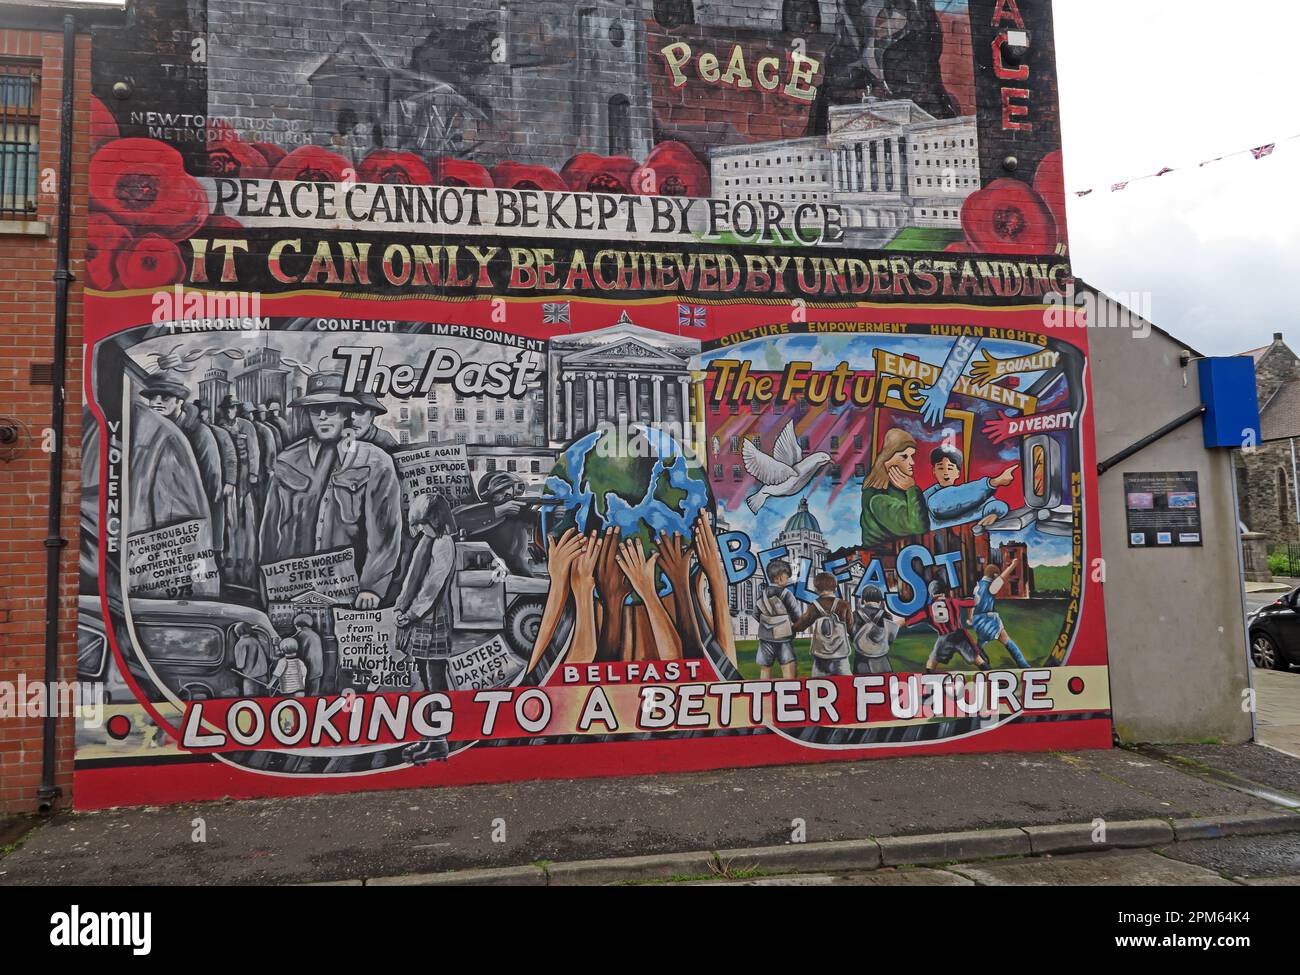 Community mural - Peace cannot be kept by force, it can only be achieved by understanding - Belfast Looking to a better future Stock Photo